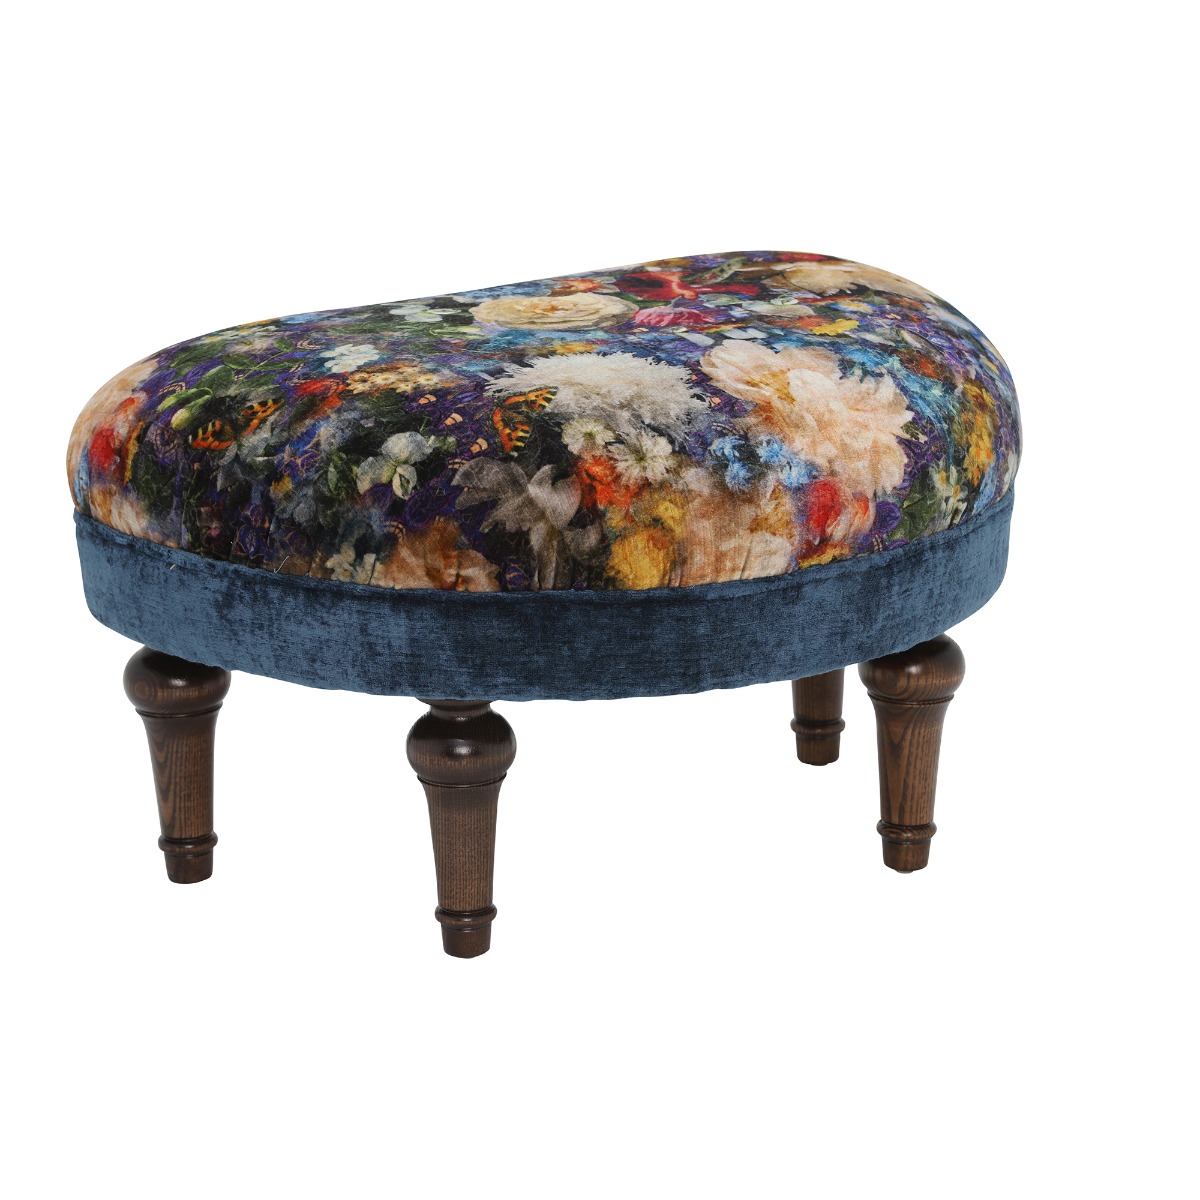 Marchmont Small Stool, Blue Fabric | Barker & Stonehouse